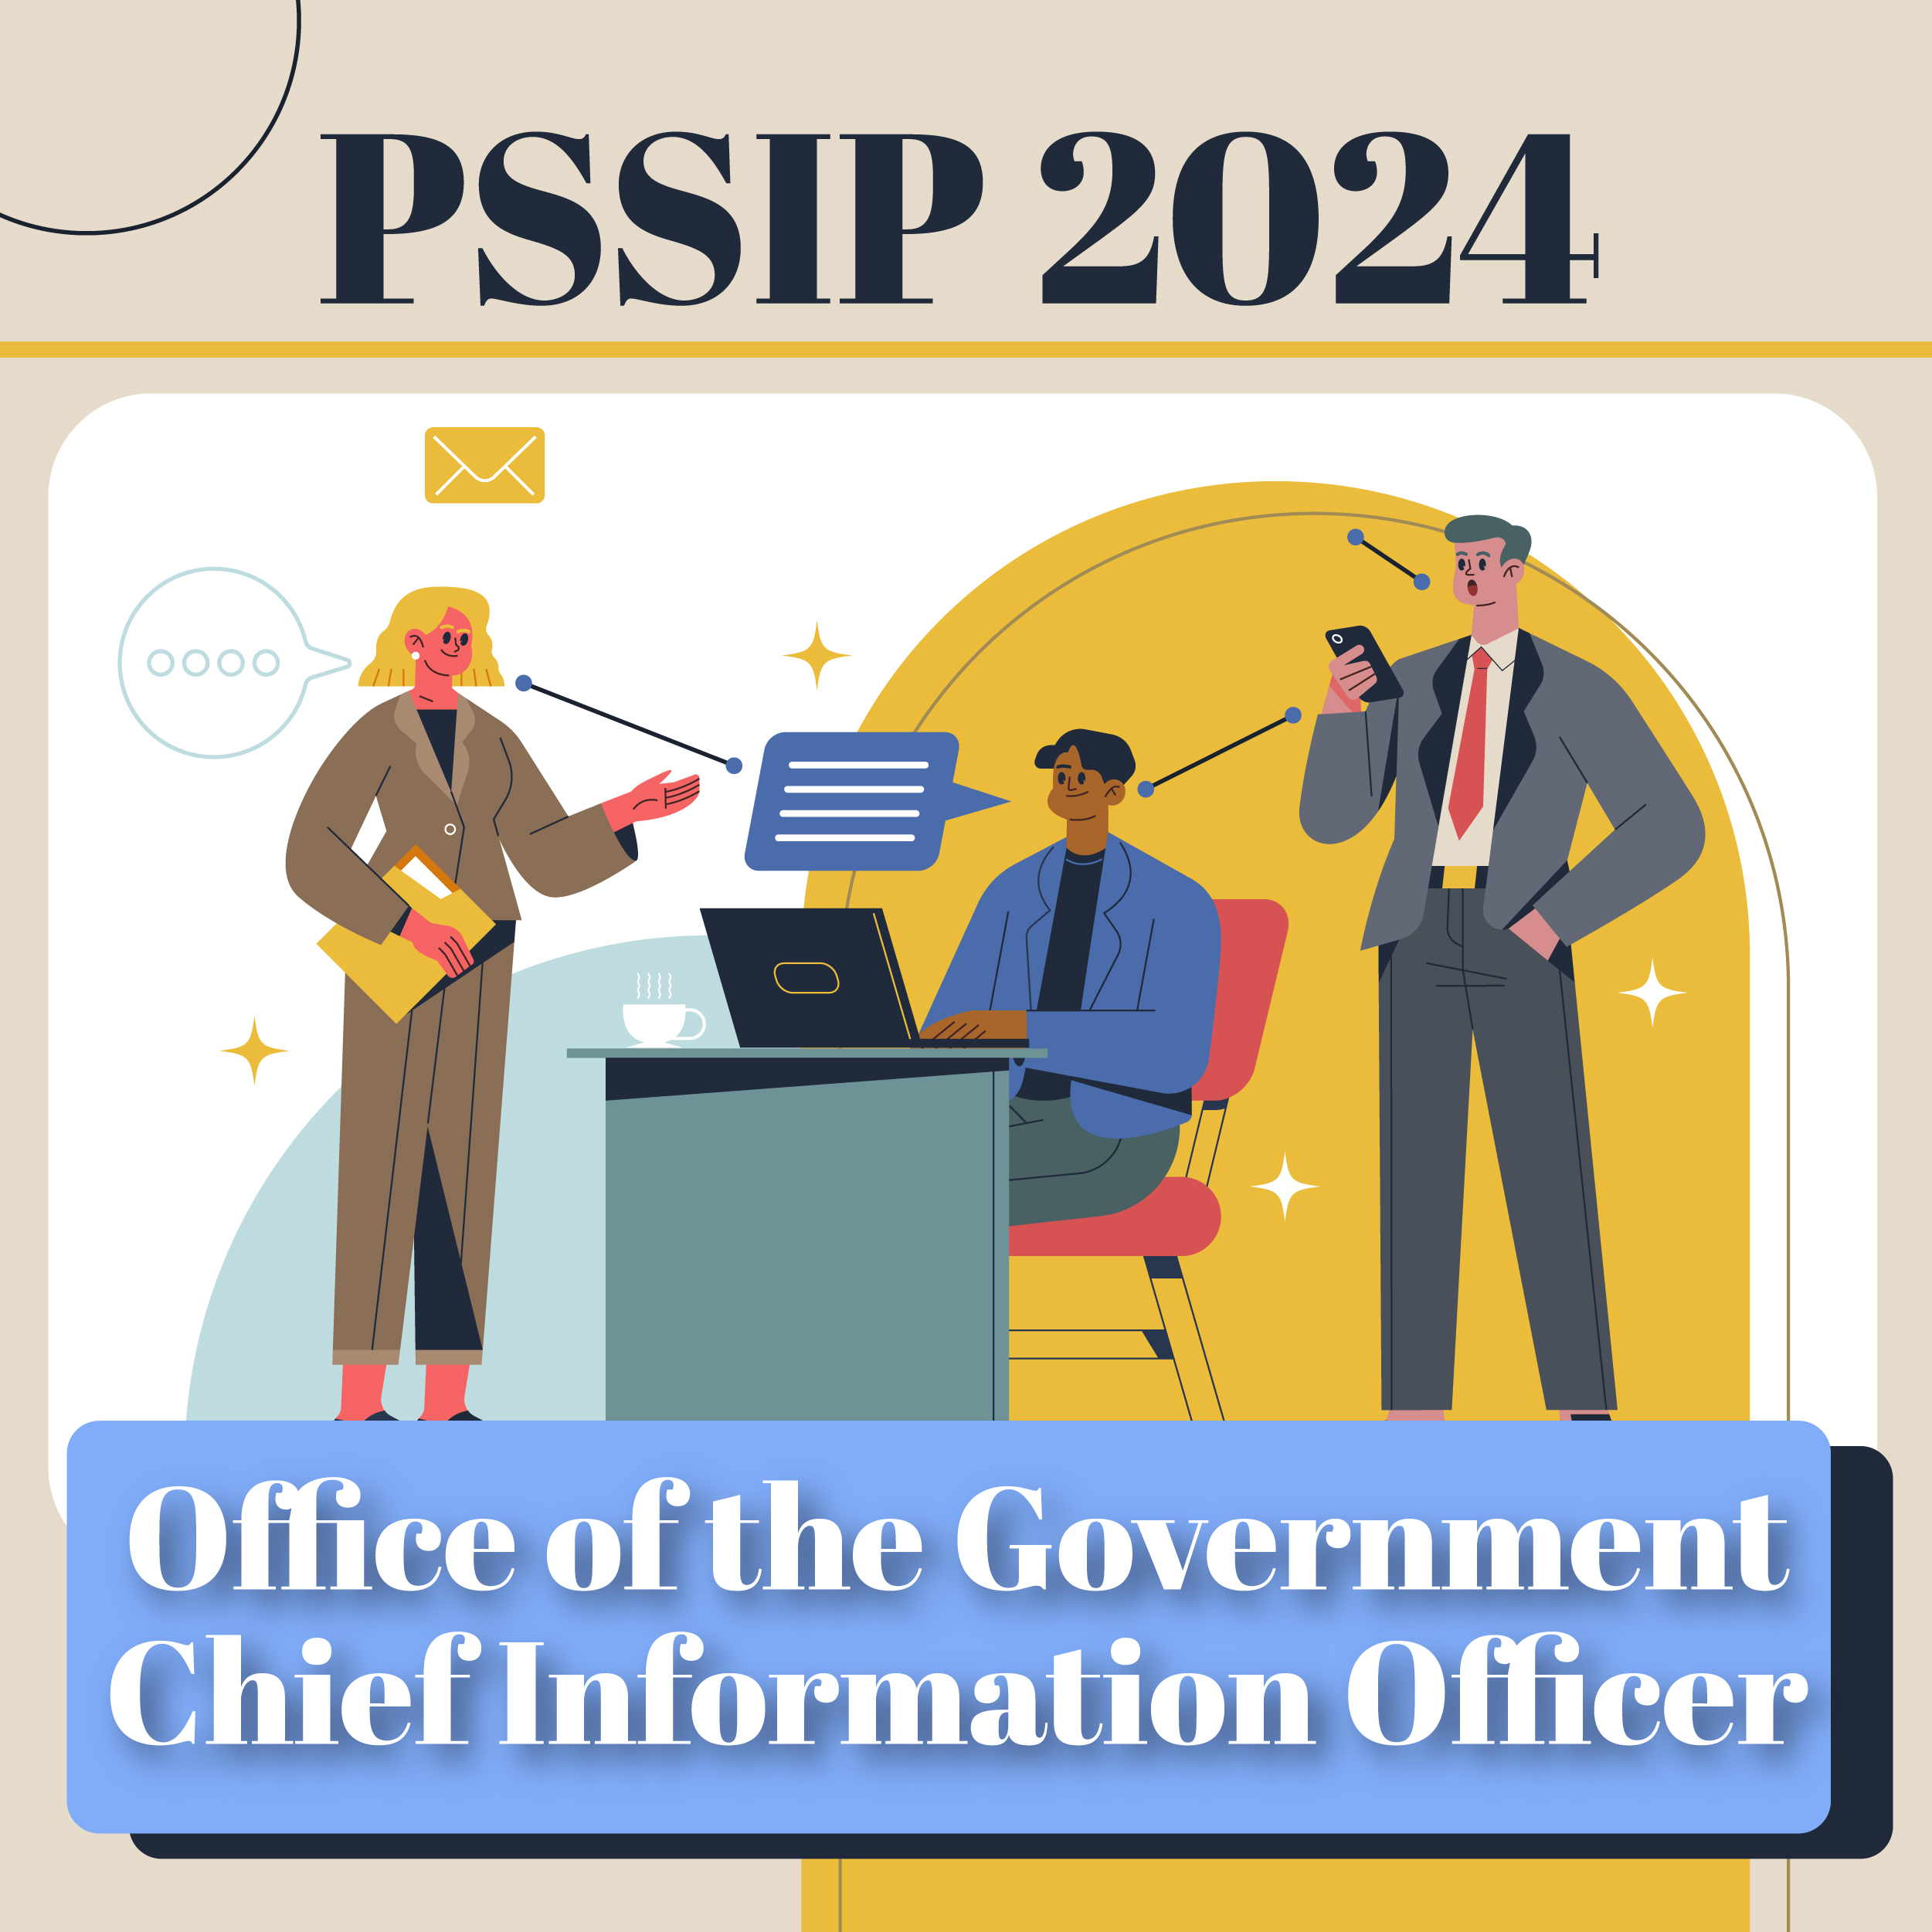 PSSIP2024 – Office of the Government Chief Information Officer